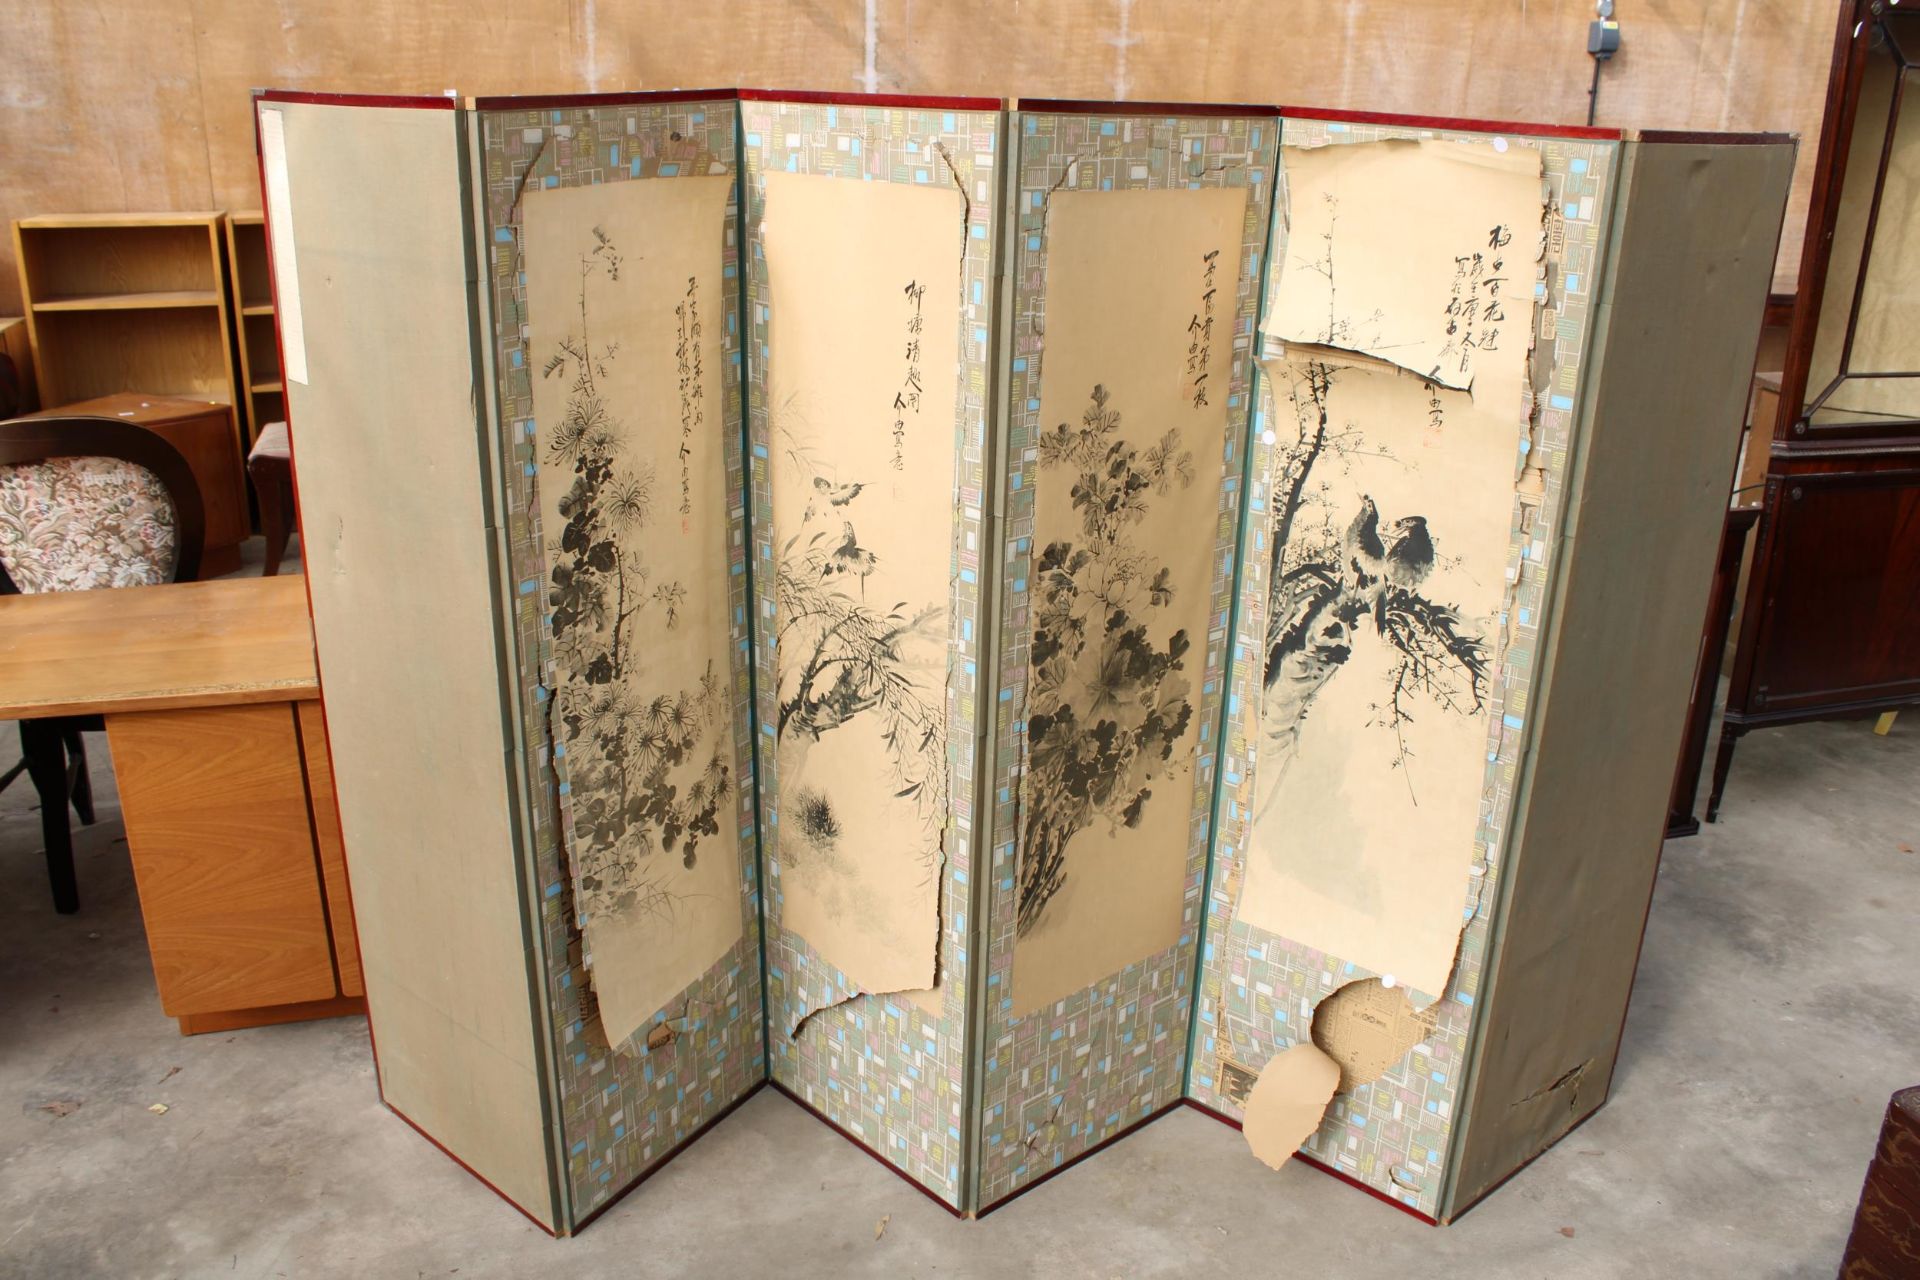 AN ORIENTAL SIX DIVISION SCREEN WITH TAPESTRY AND SILK MOUNTAIN SCENES EACH SECTION IS 60" X 18" - Image 5 of 8